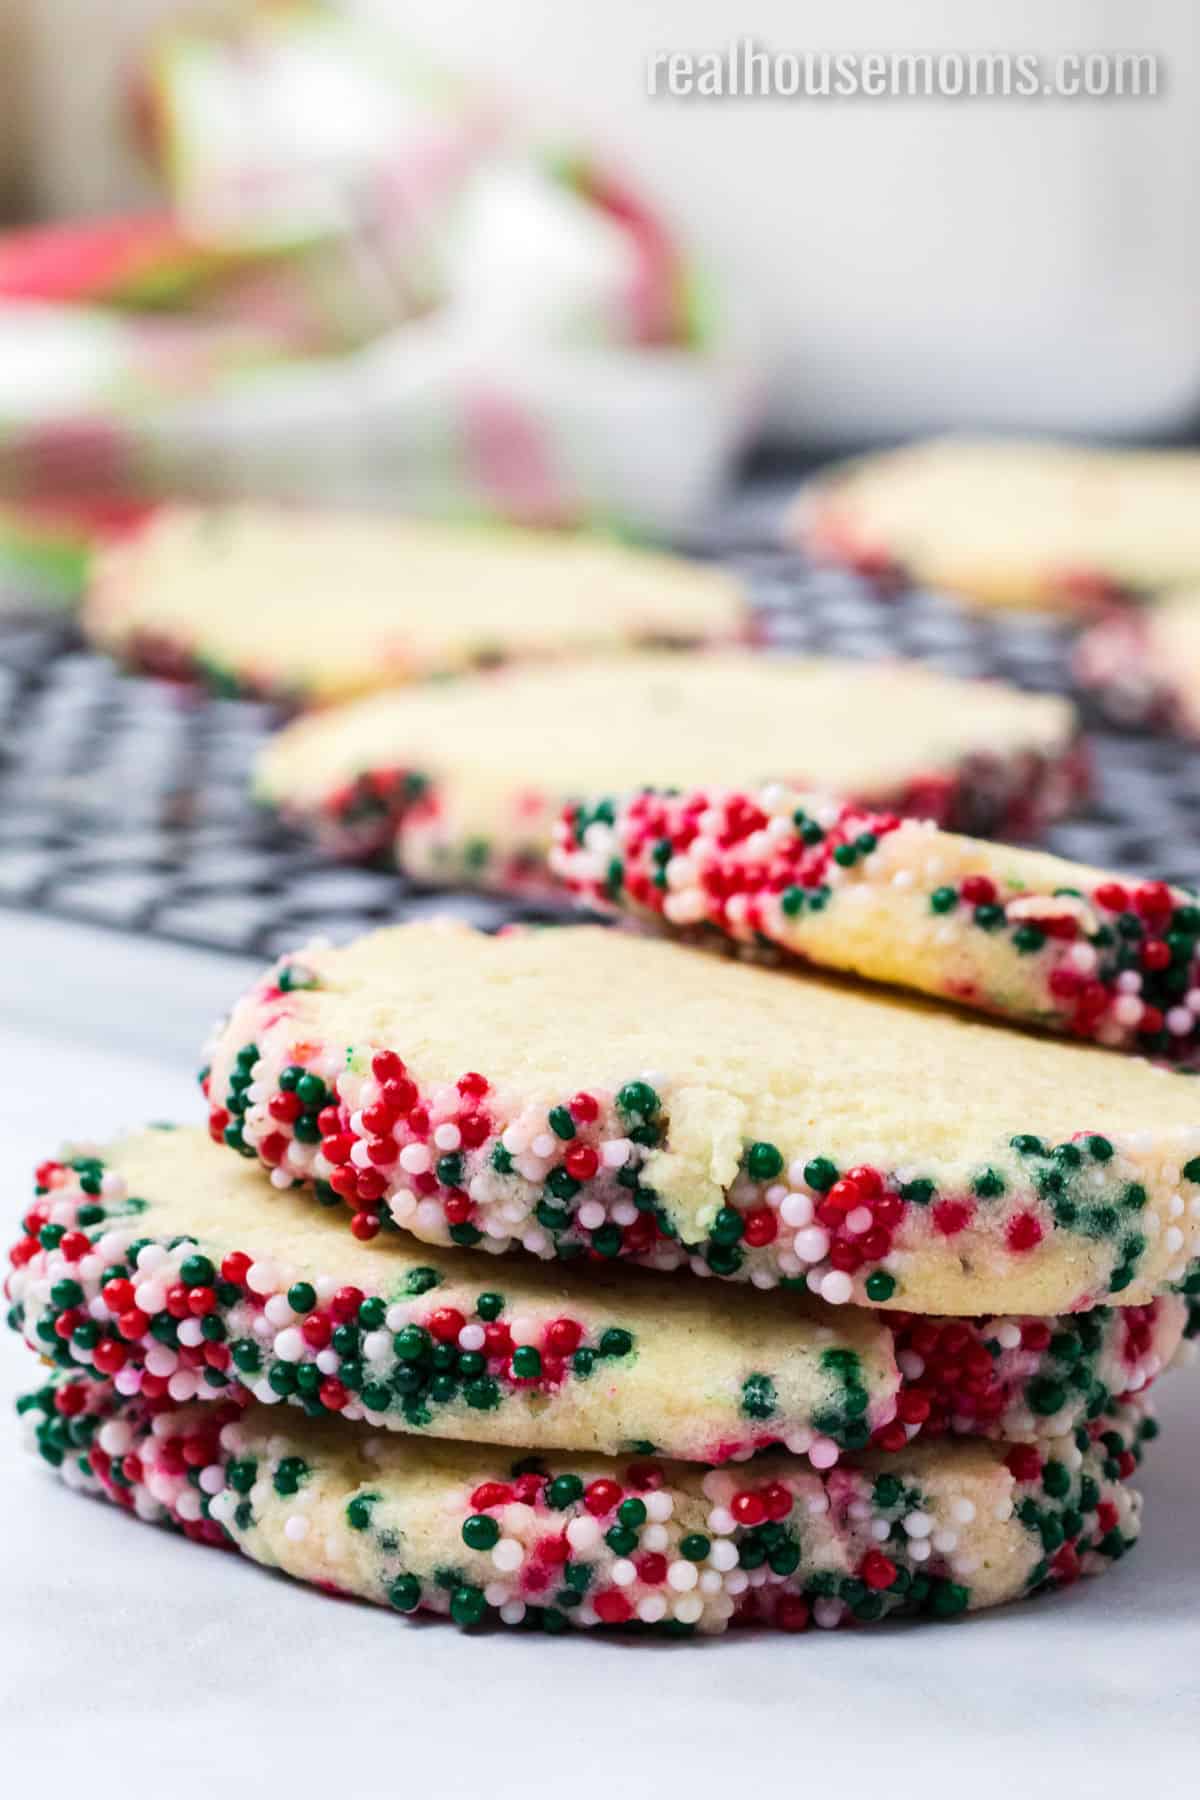 slice and bake sugar cookie recipes